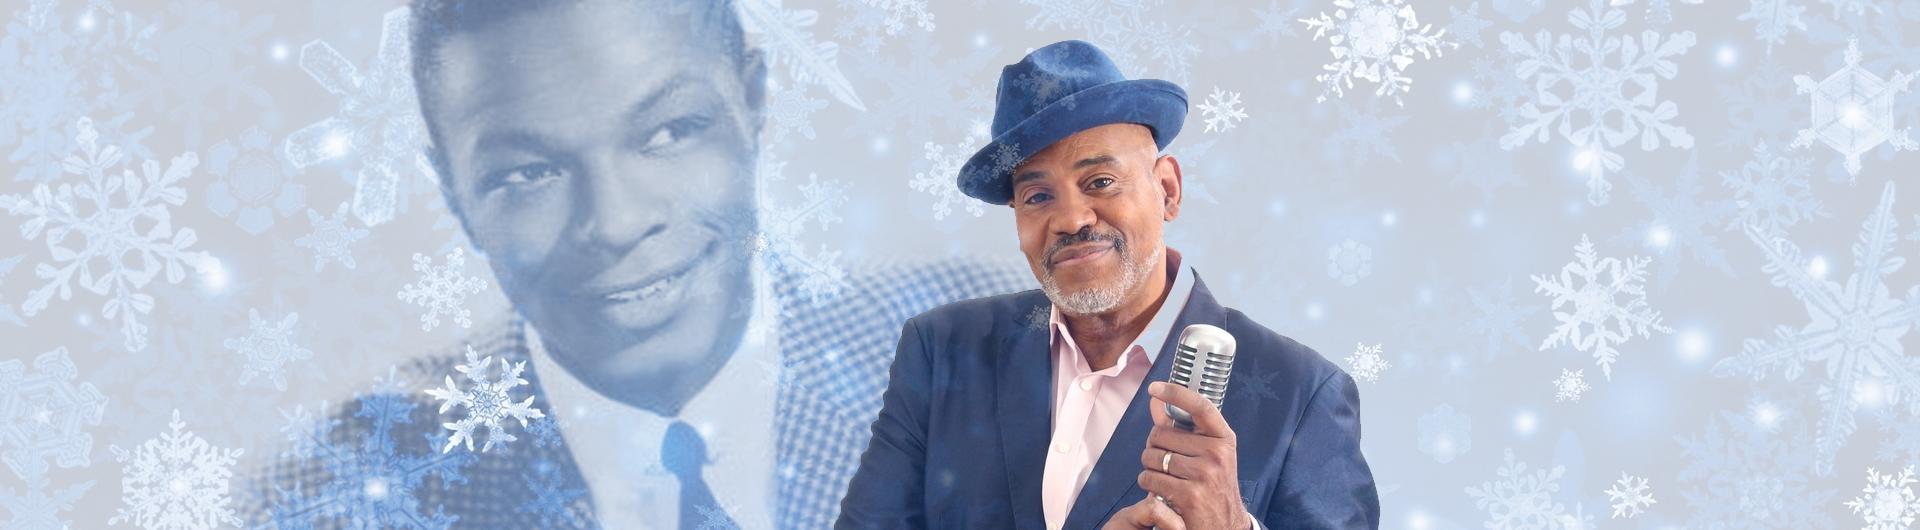 Allan Harris in a blue suit and hat stands in front of a microphone. Illustrated snowflakes fall behind him where there's also a screened back image of Nat King Cole.